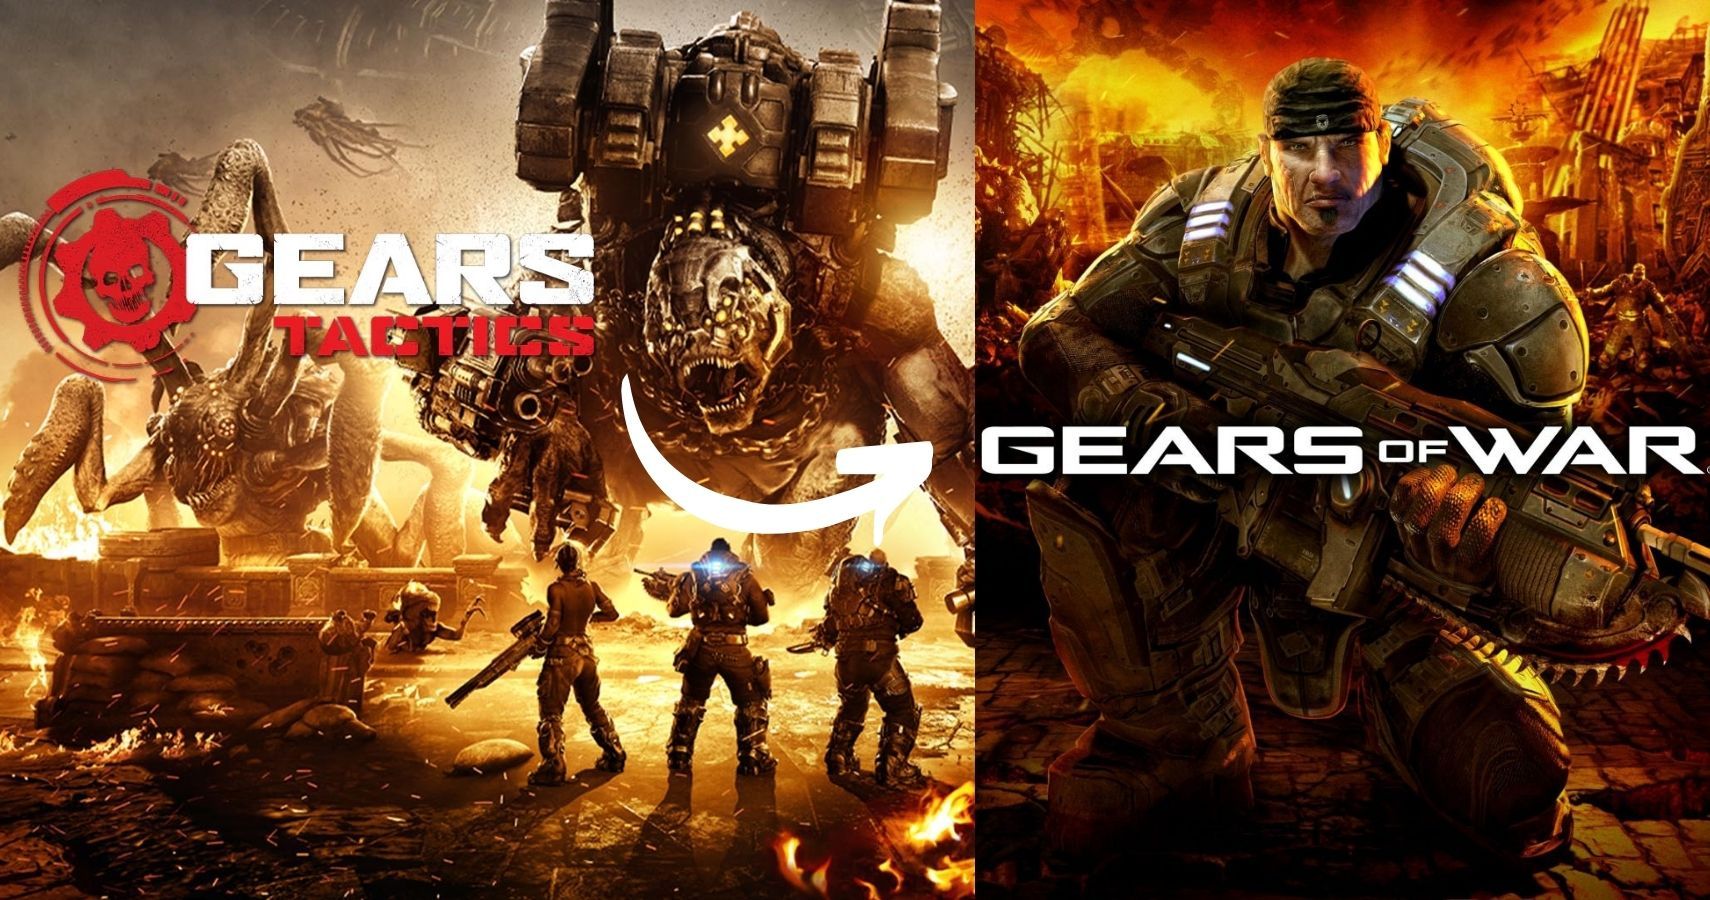 Gears Tactics Acts and Chapters: How Many are in the Game